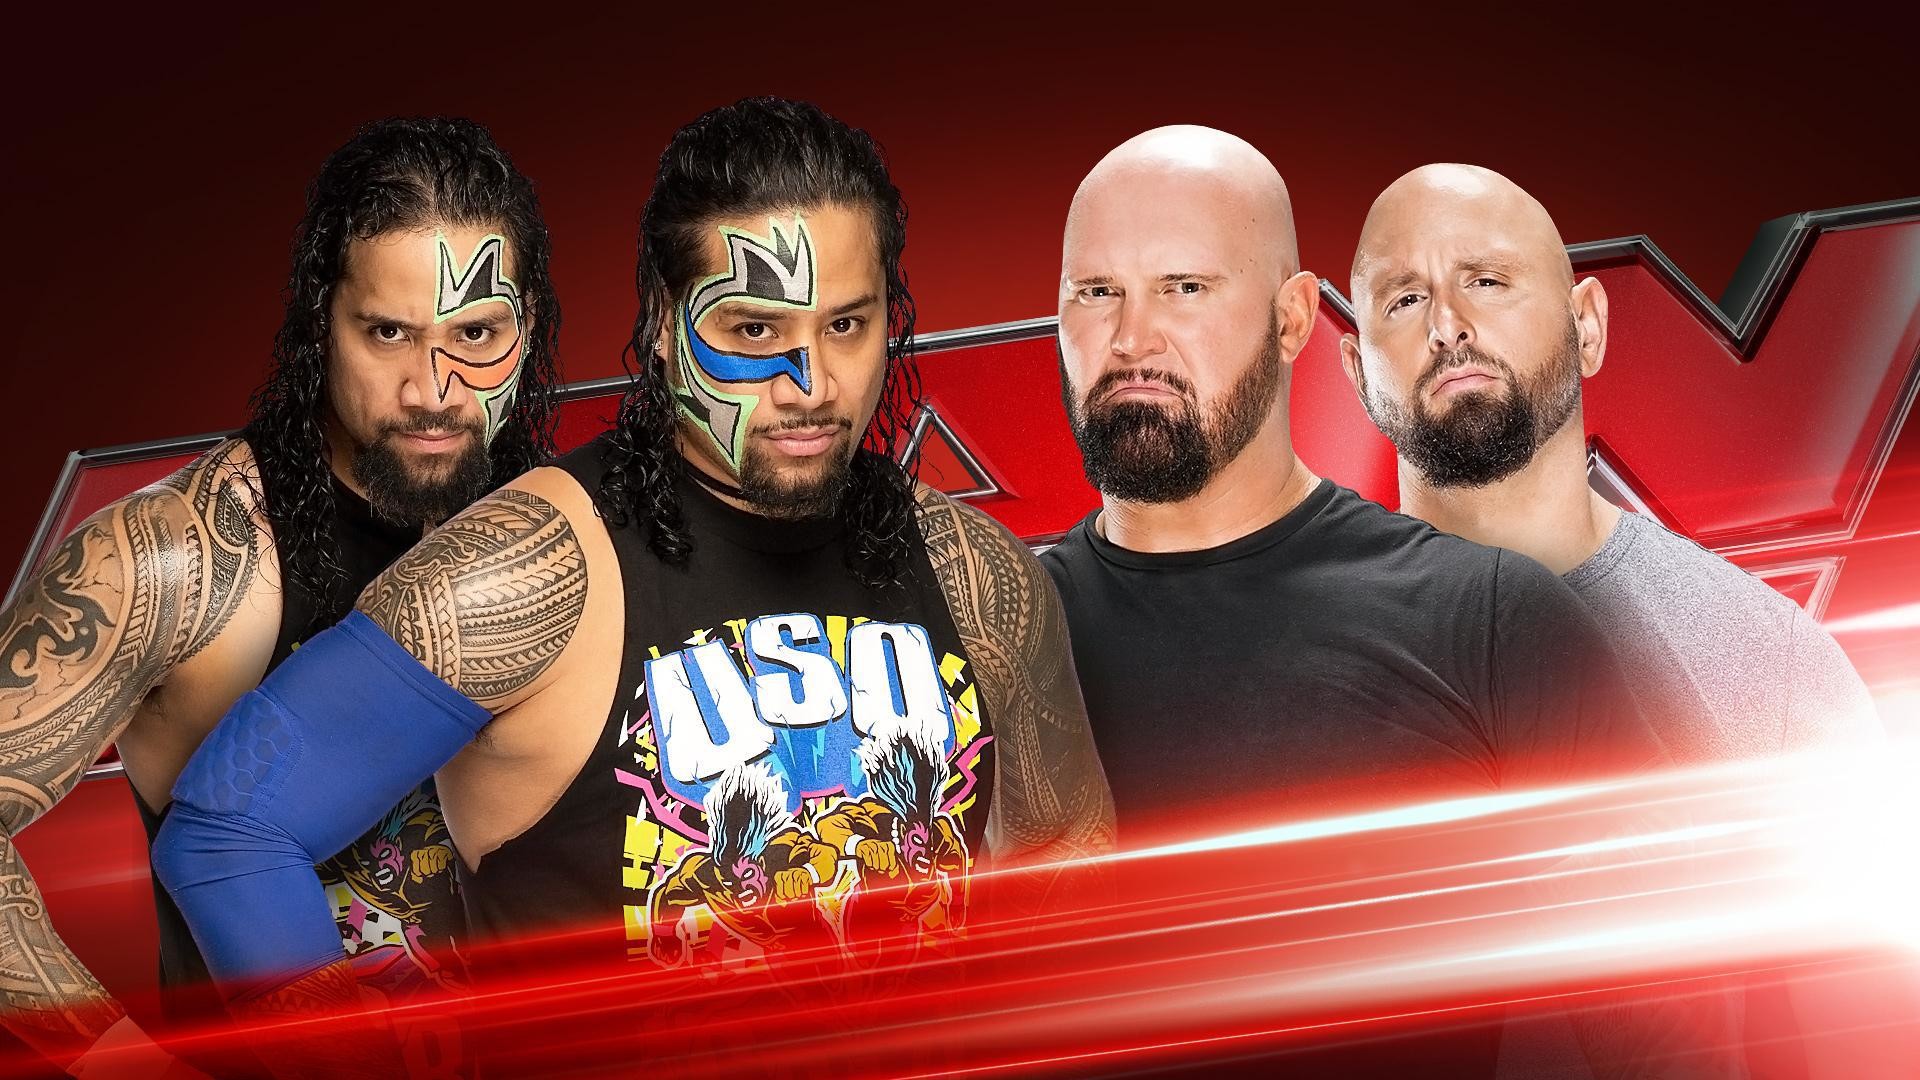 1920x1080 The Usos (Jimmy Uso and Jey Uso) vs. The Club (Karl Anderson